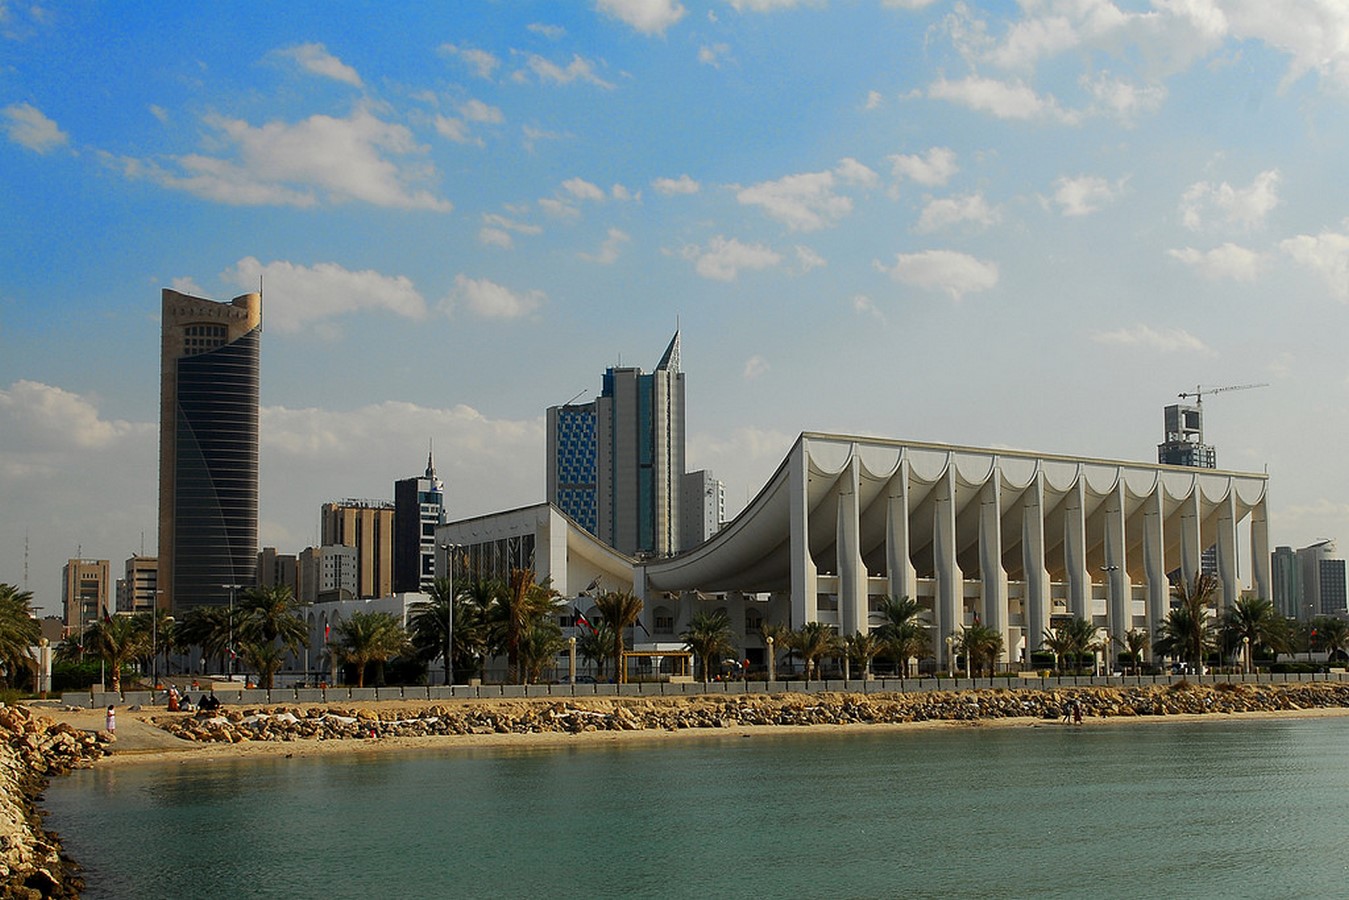 Kuwait National Assembly Building by Jørn Utzon: Architecture inspired from Bazaars - Sheet3